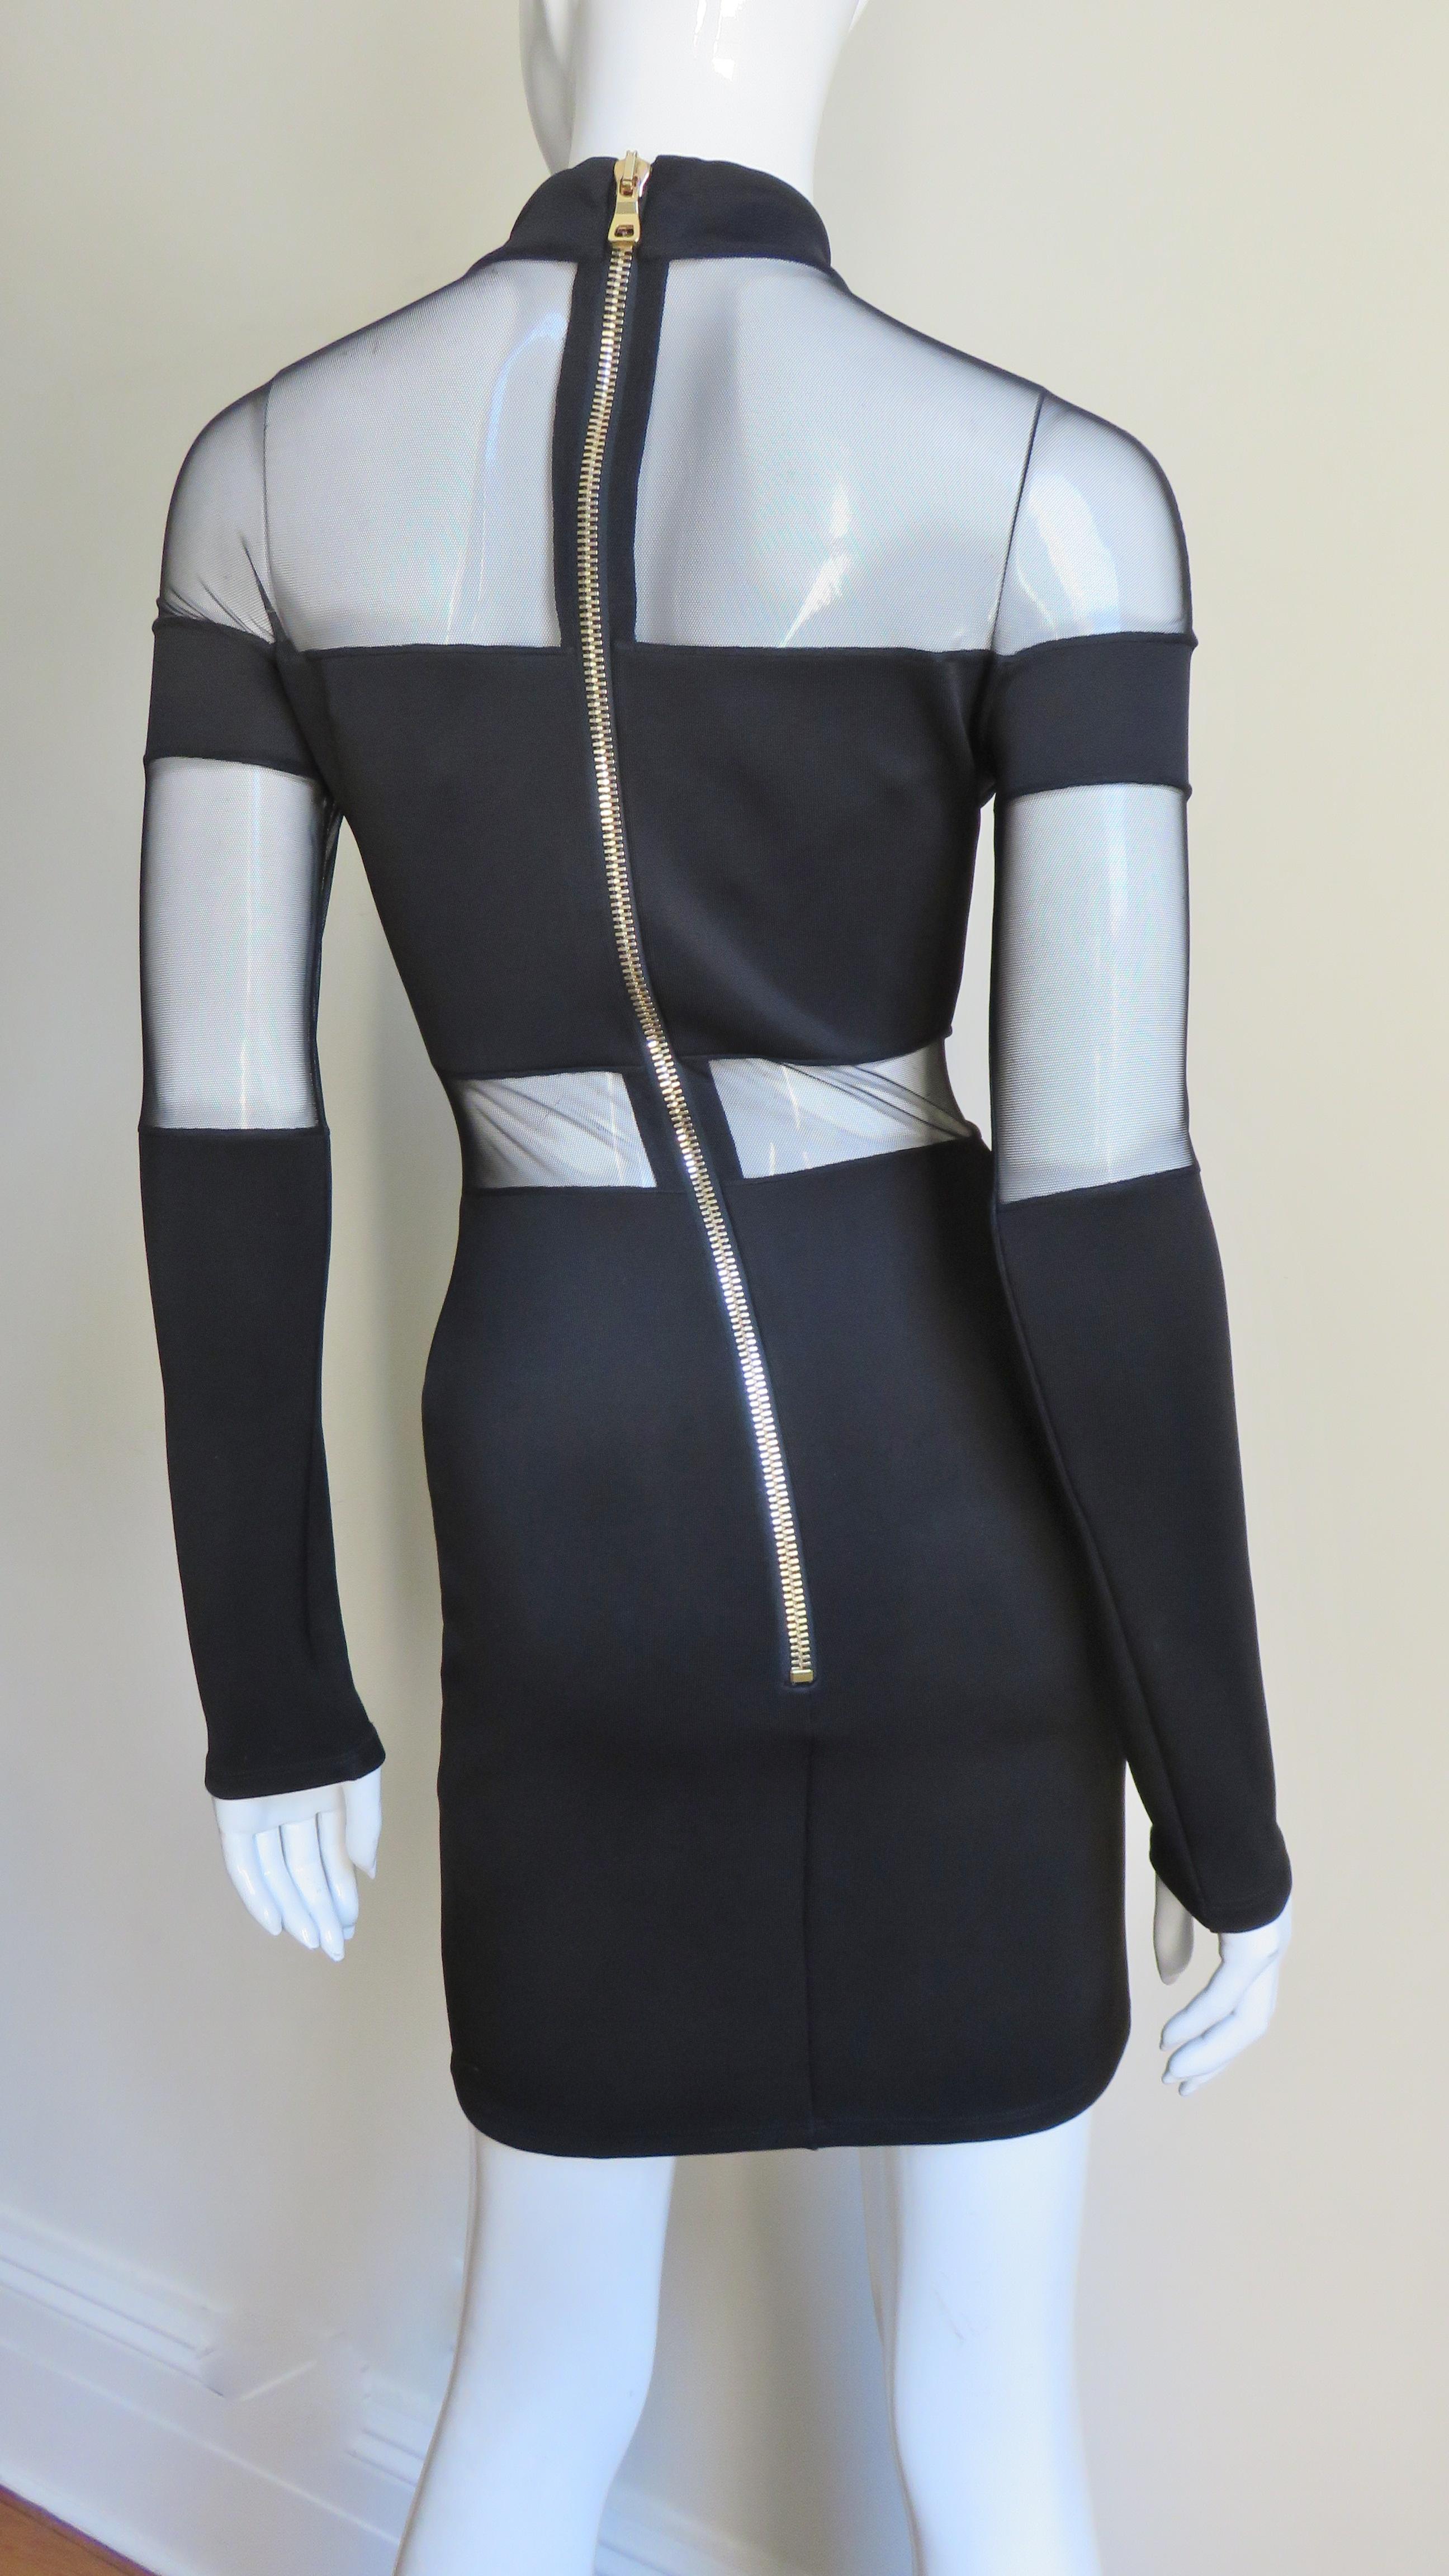 Pierre Balmain Bodycon Dress with Sheer Shoulders and Waist For Sale 5